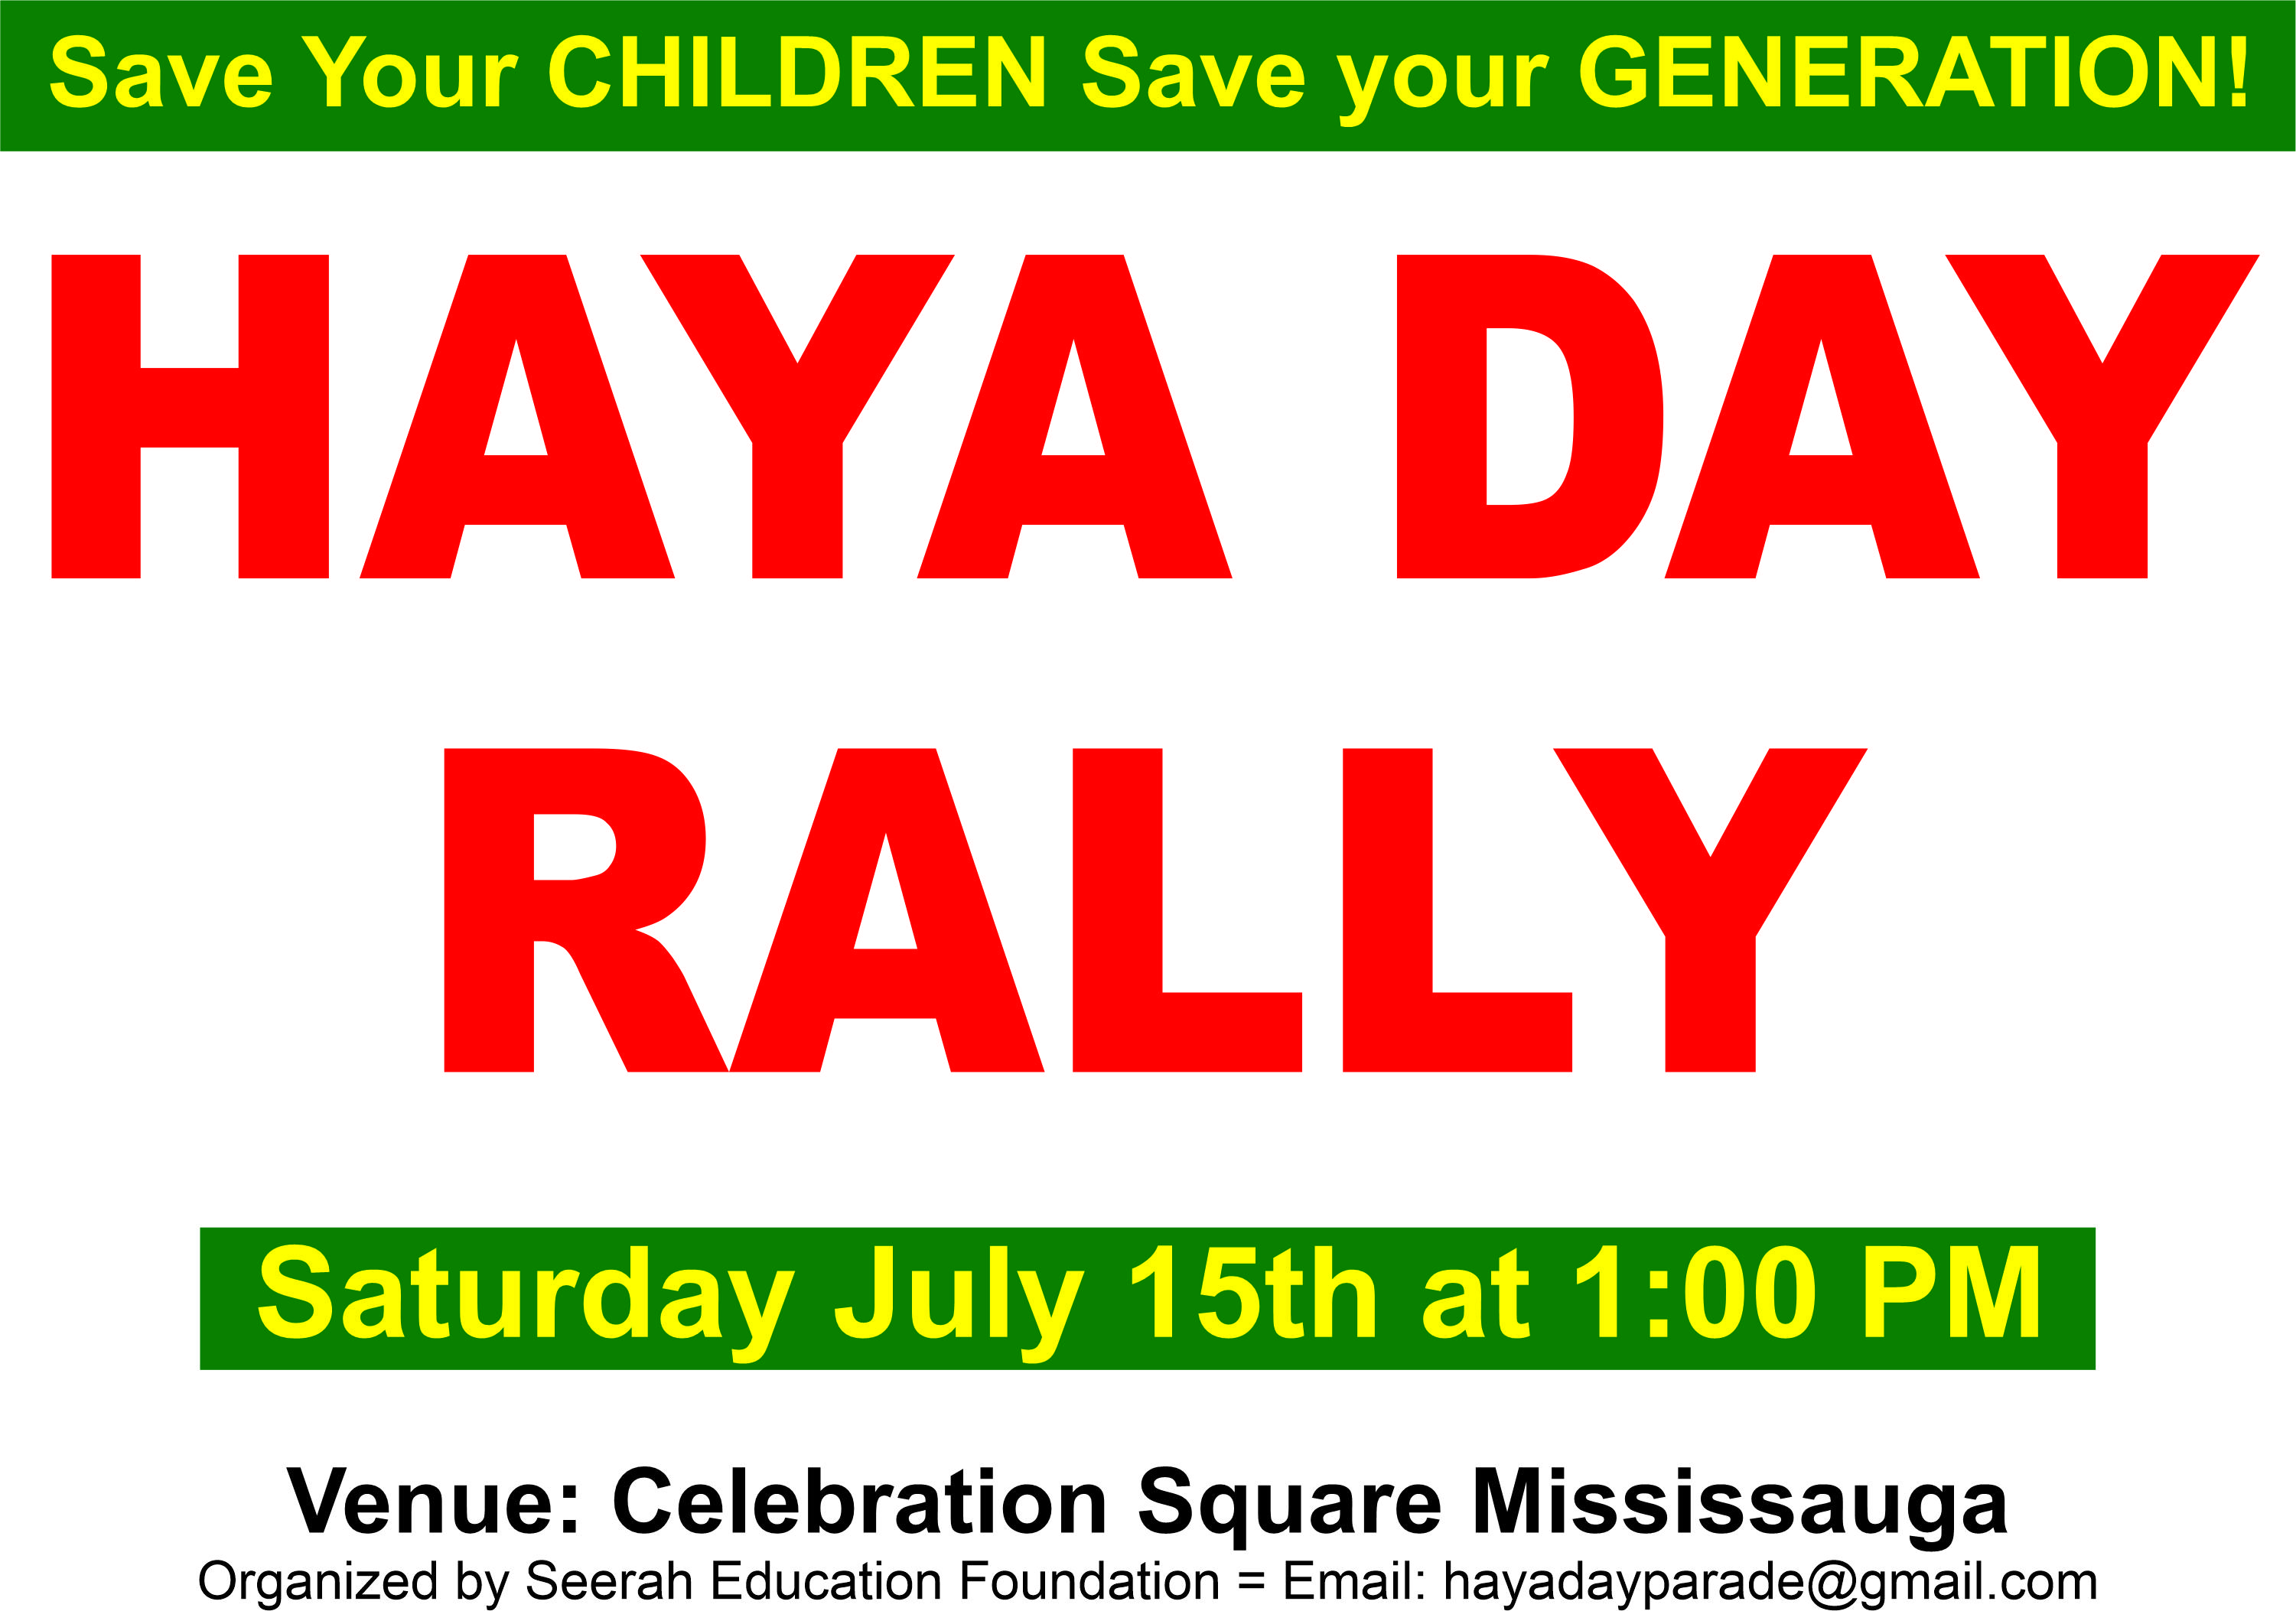 Haya Day Parade in Mississauga on Saturday, July 15th